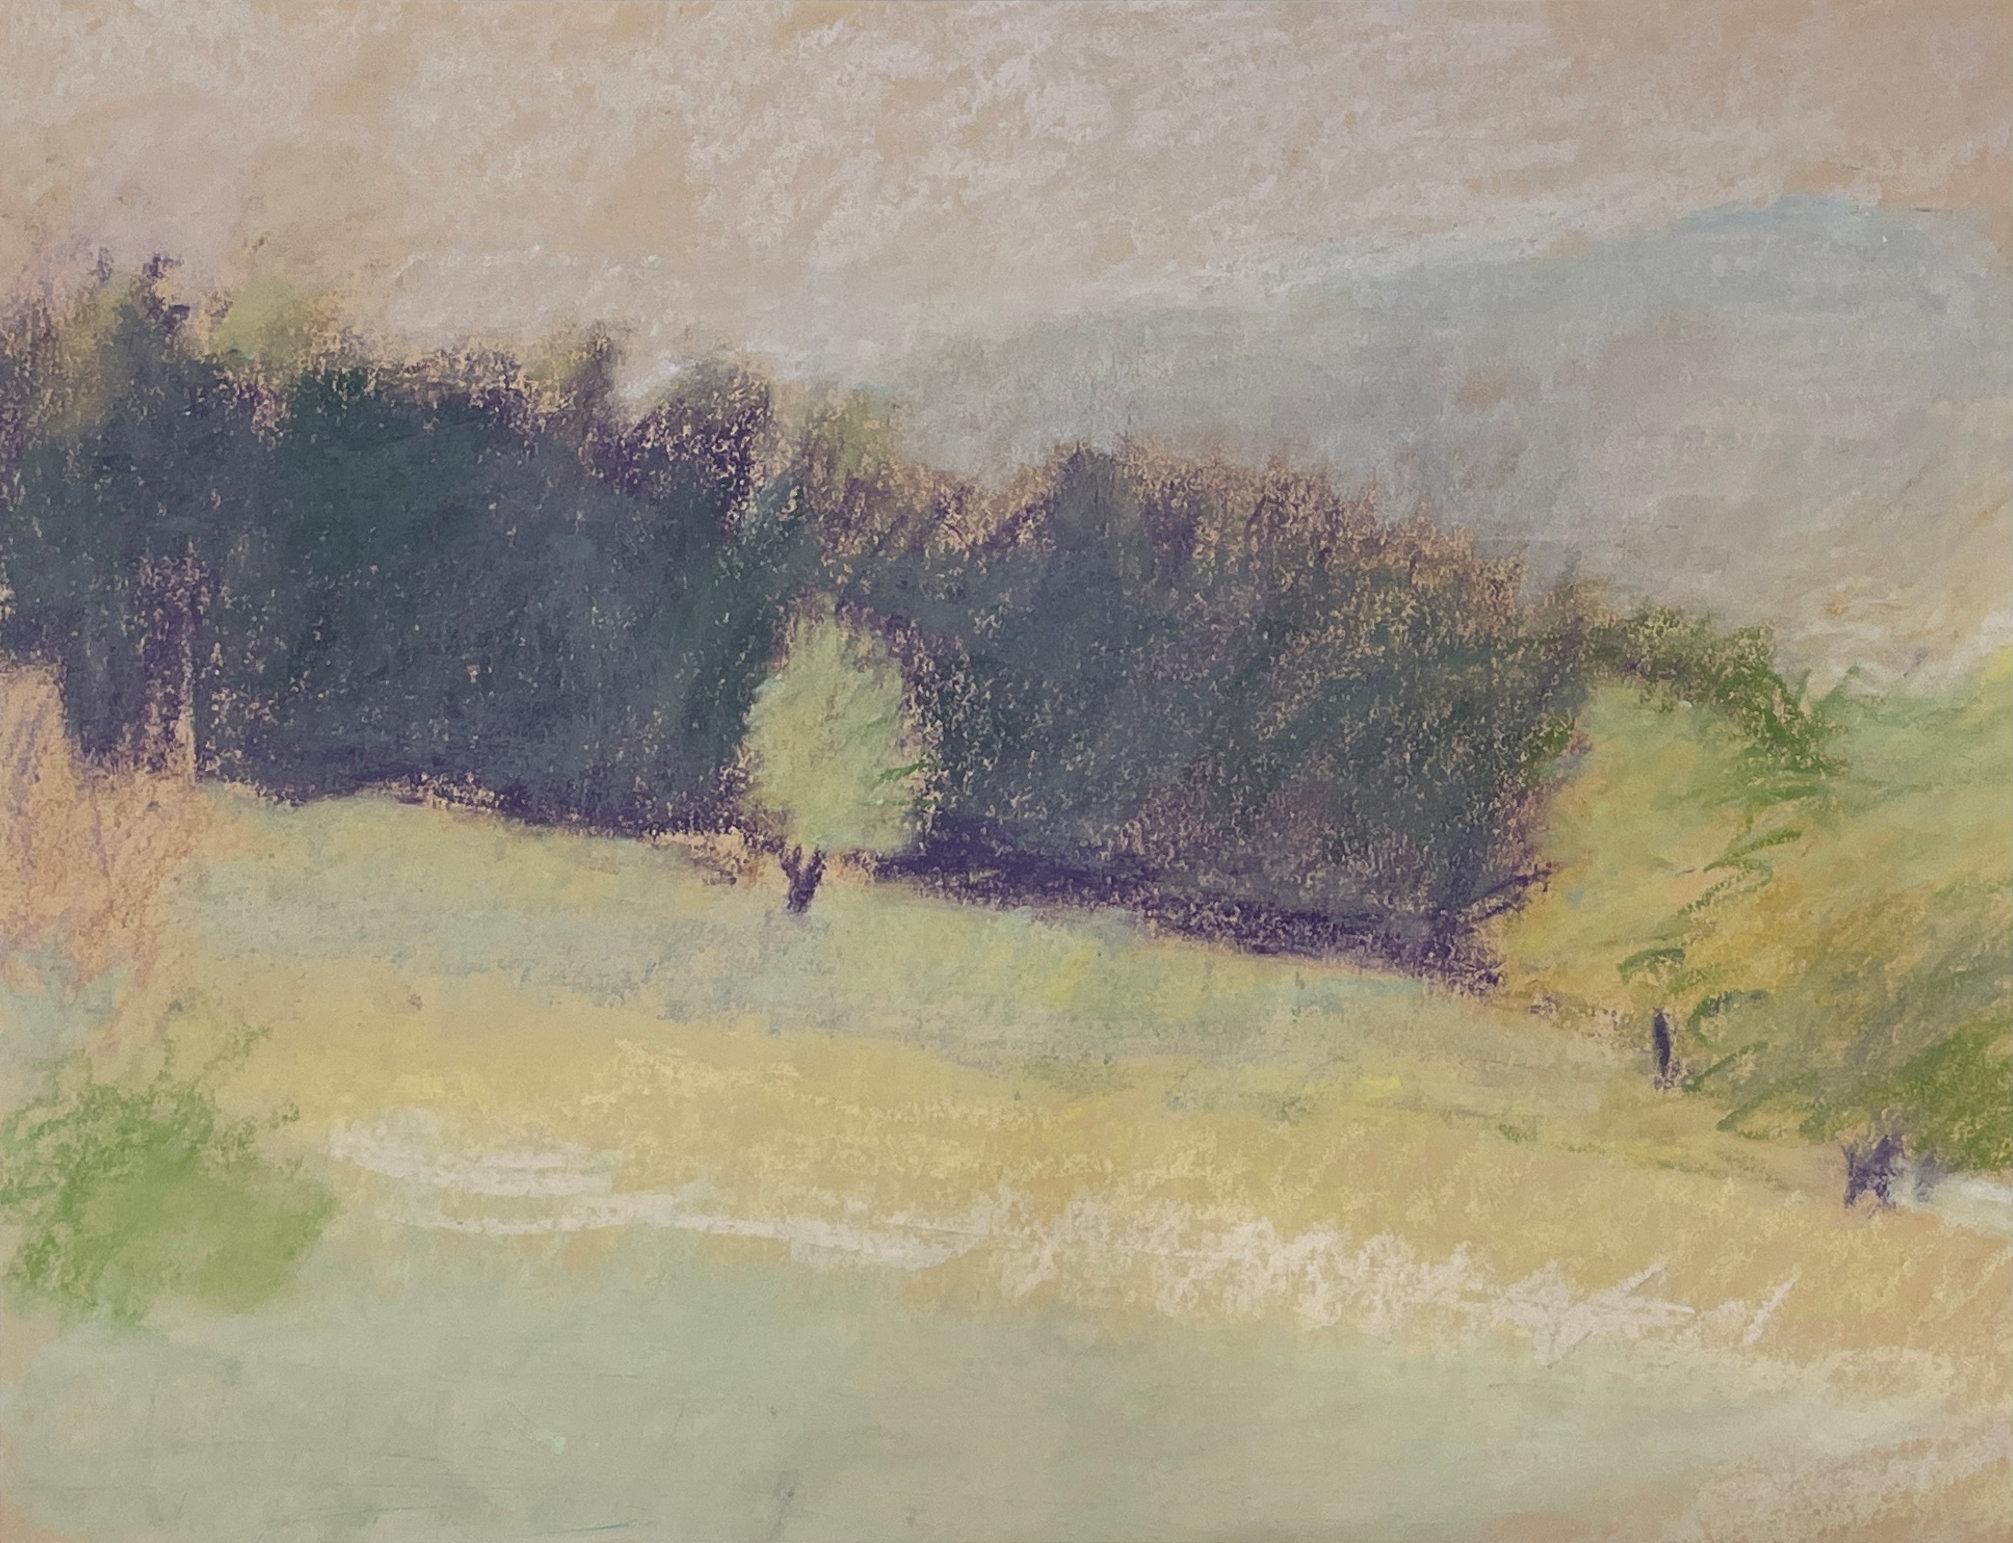 Wolf Kahn
Purple Hills
Pastel on paper
10 1/2 x 13 1/2 inches

Provenance:
Collection of Stafford Elias
Christies New York, Interiors, December 13, 2017, Lot 343
Private Collection, Florida

An important member of the second generation New York